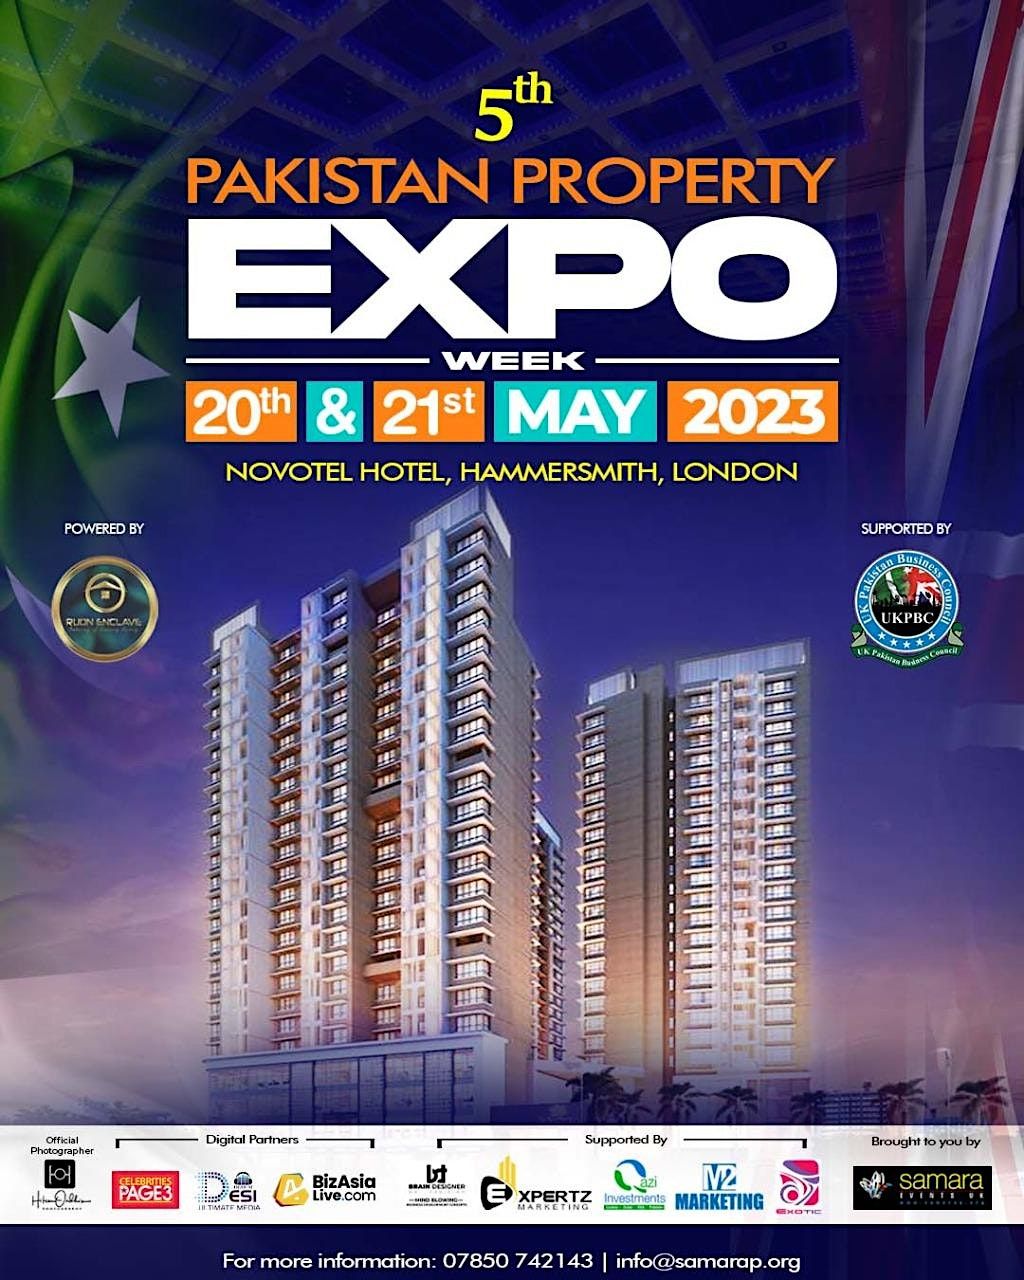 5th Pakistan Property Expo Week 2023. Free Entry